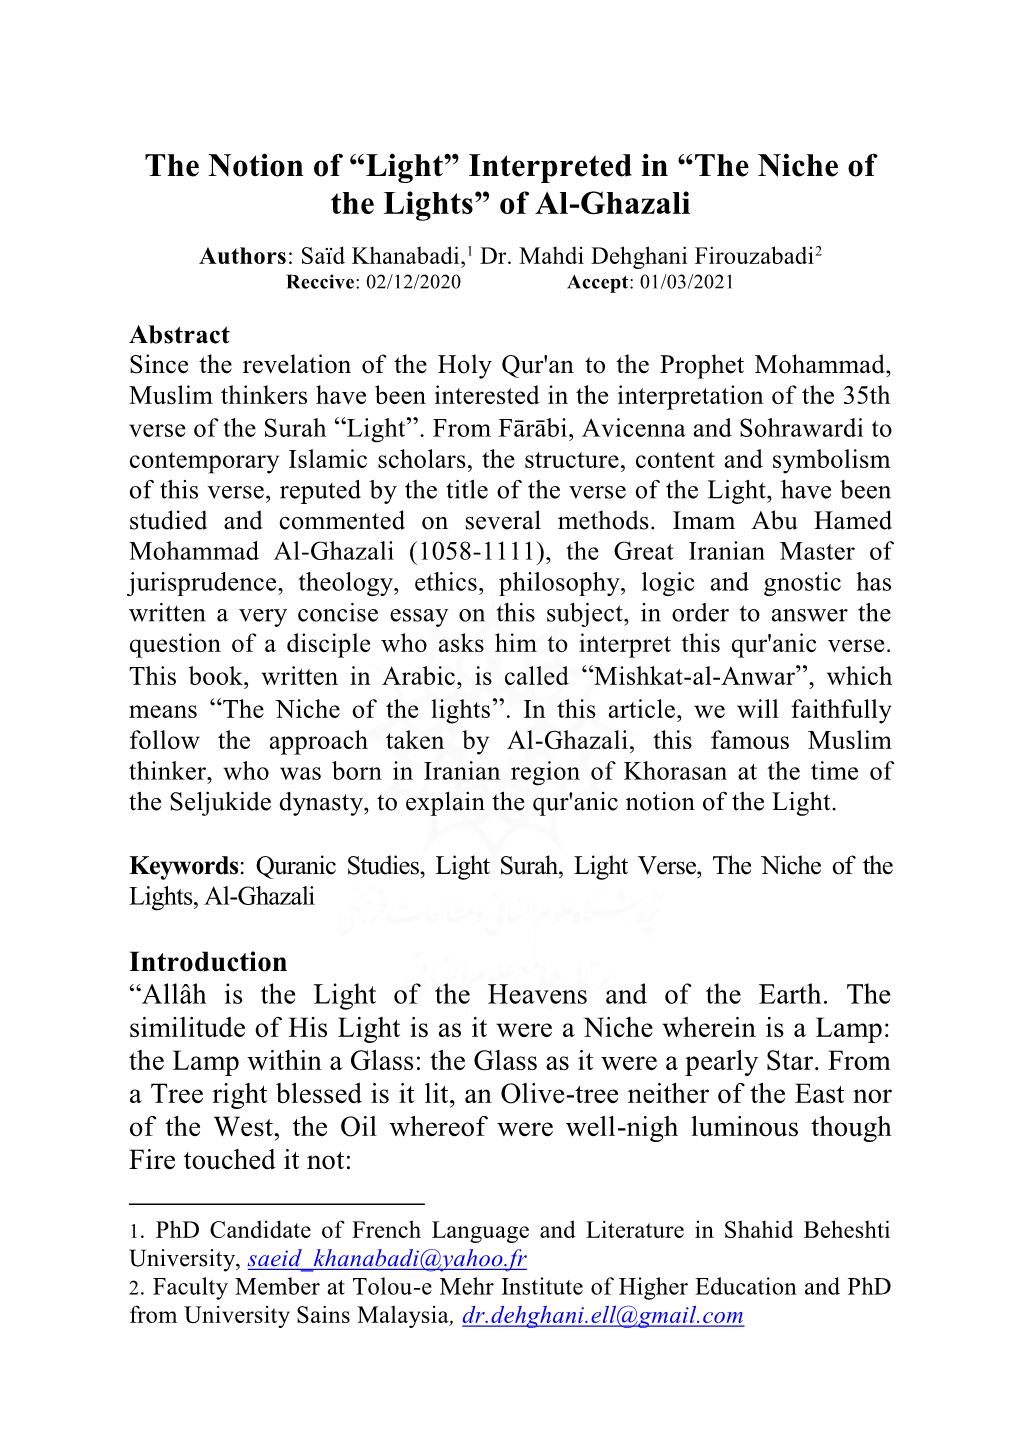 The Notion of “Light” Interpreted in “The Niche of the Lights” of Al-Ghazali Authors: Saïd Khanabadi,1 Dr